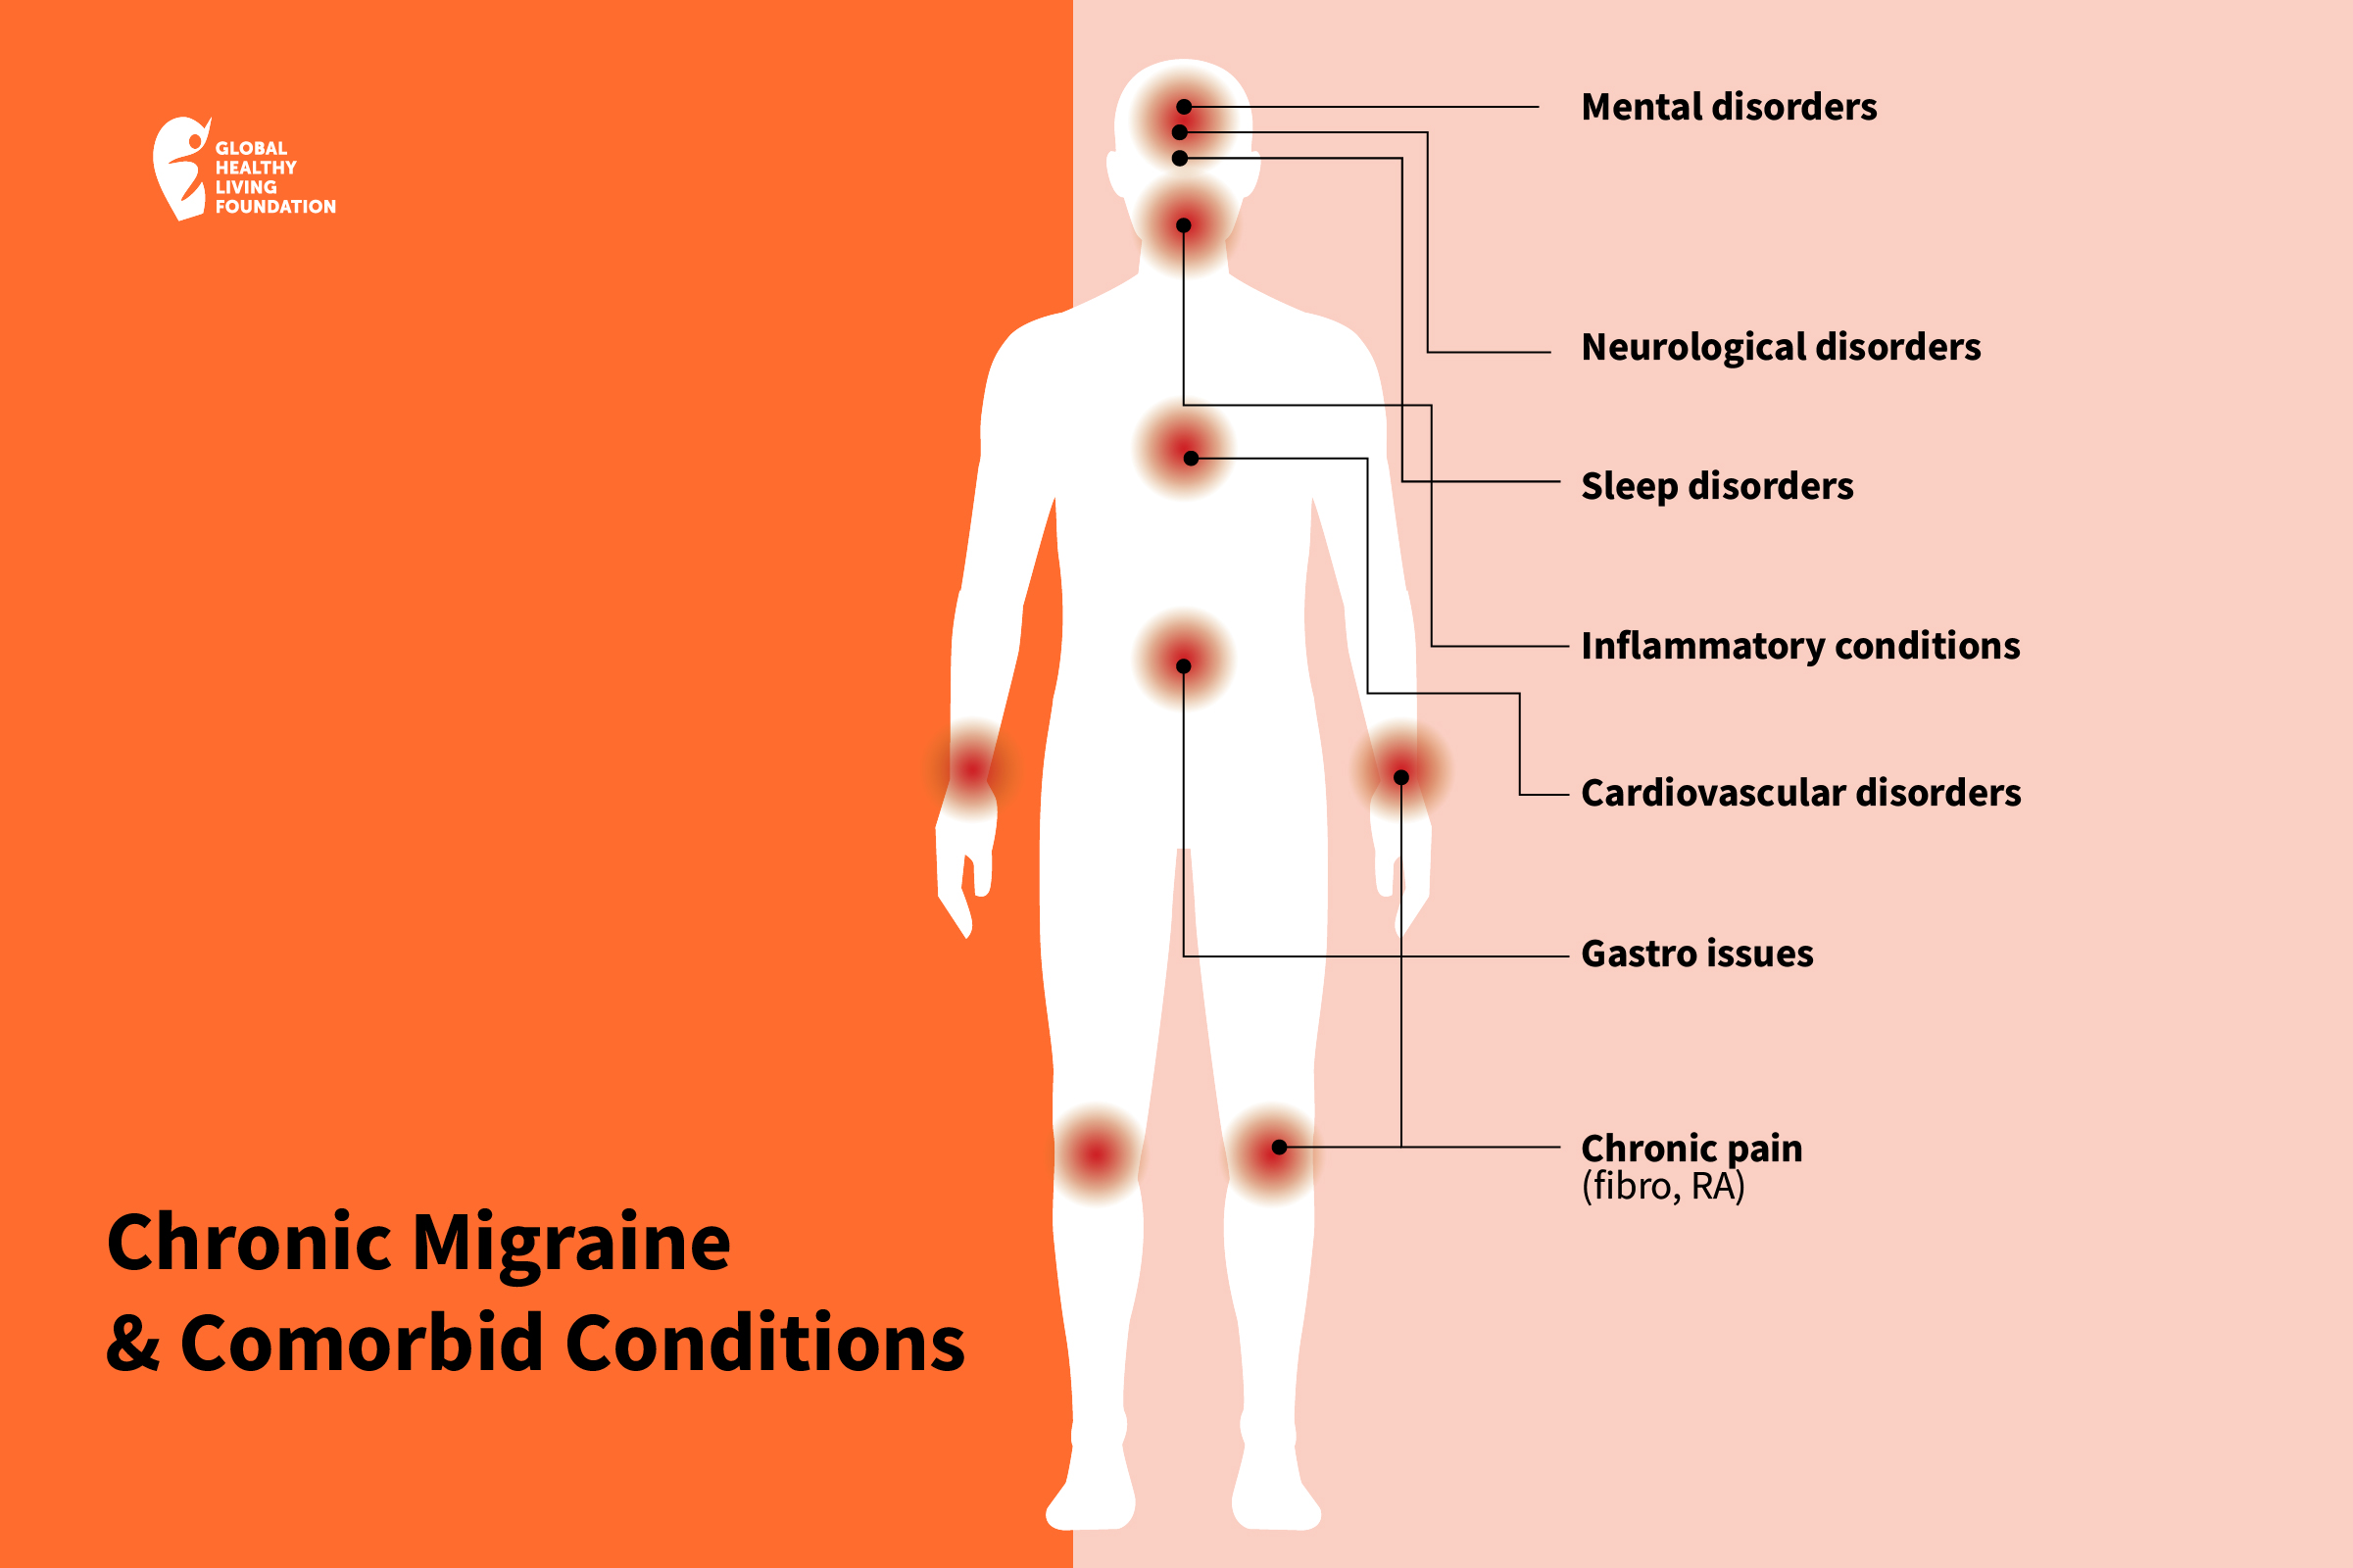 Chronic Migraine and Comorbid Conditions: What You Need to Know